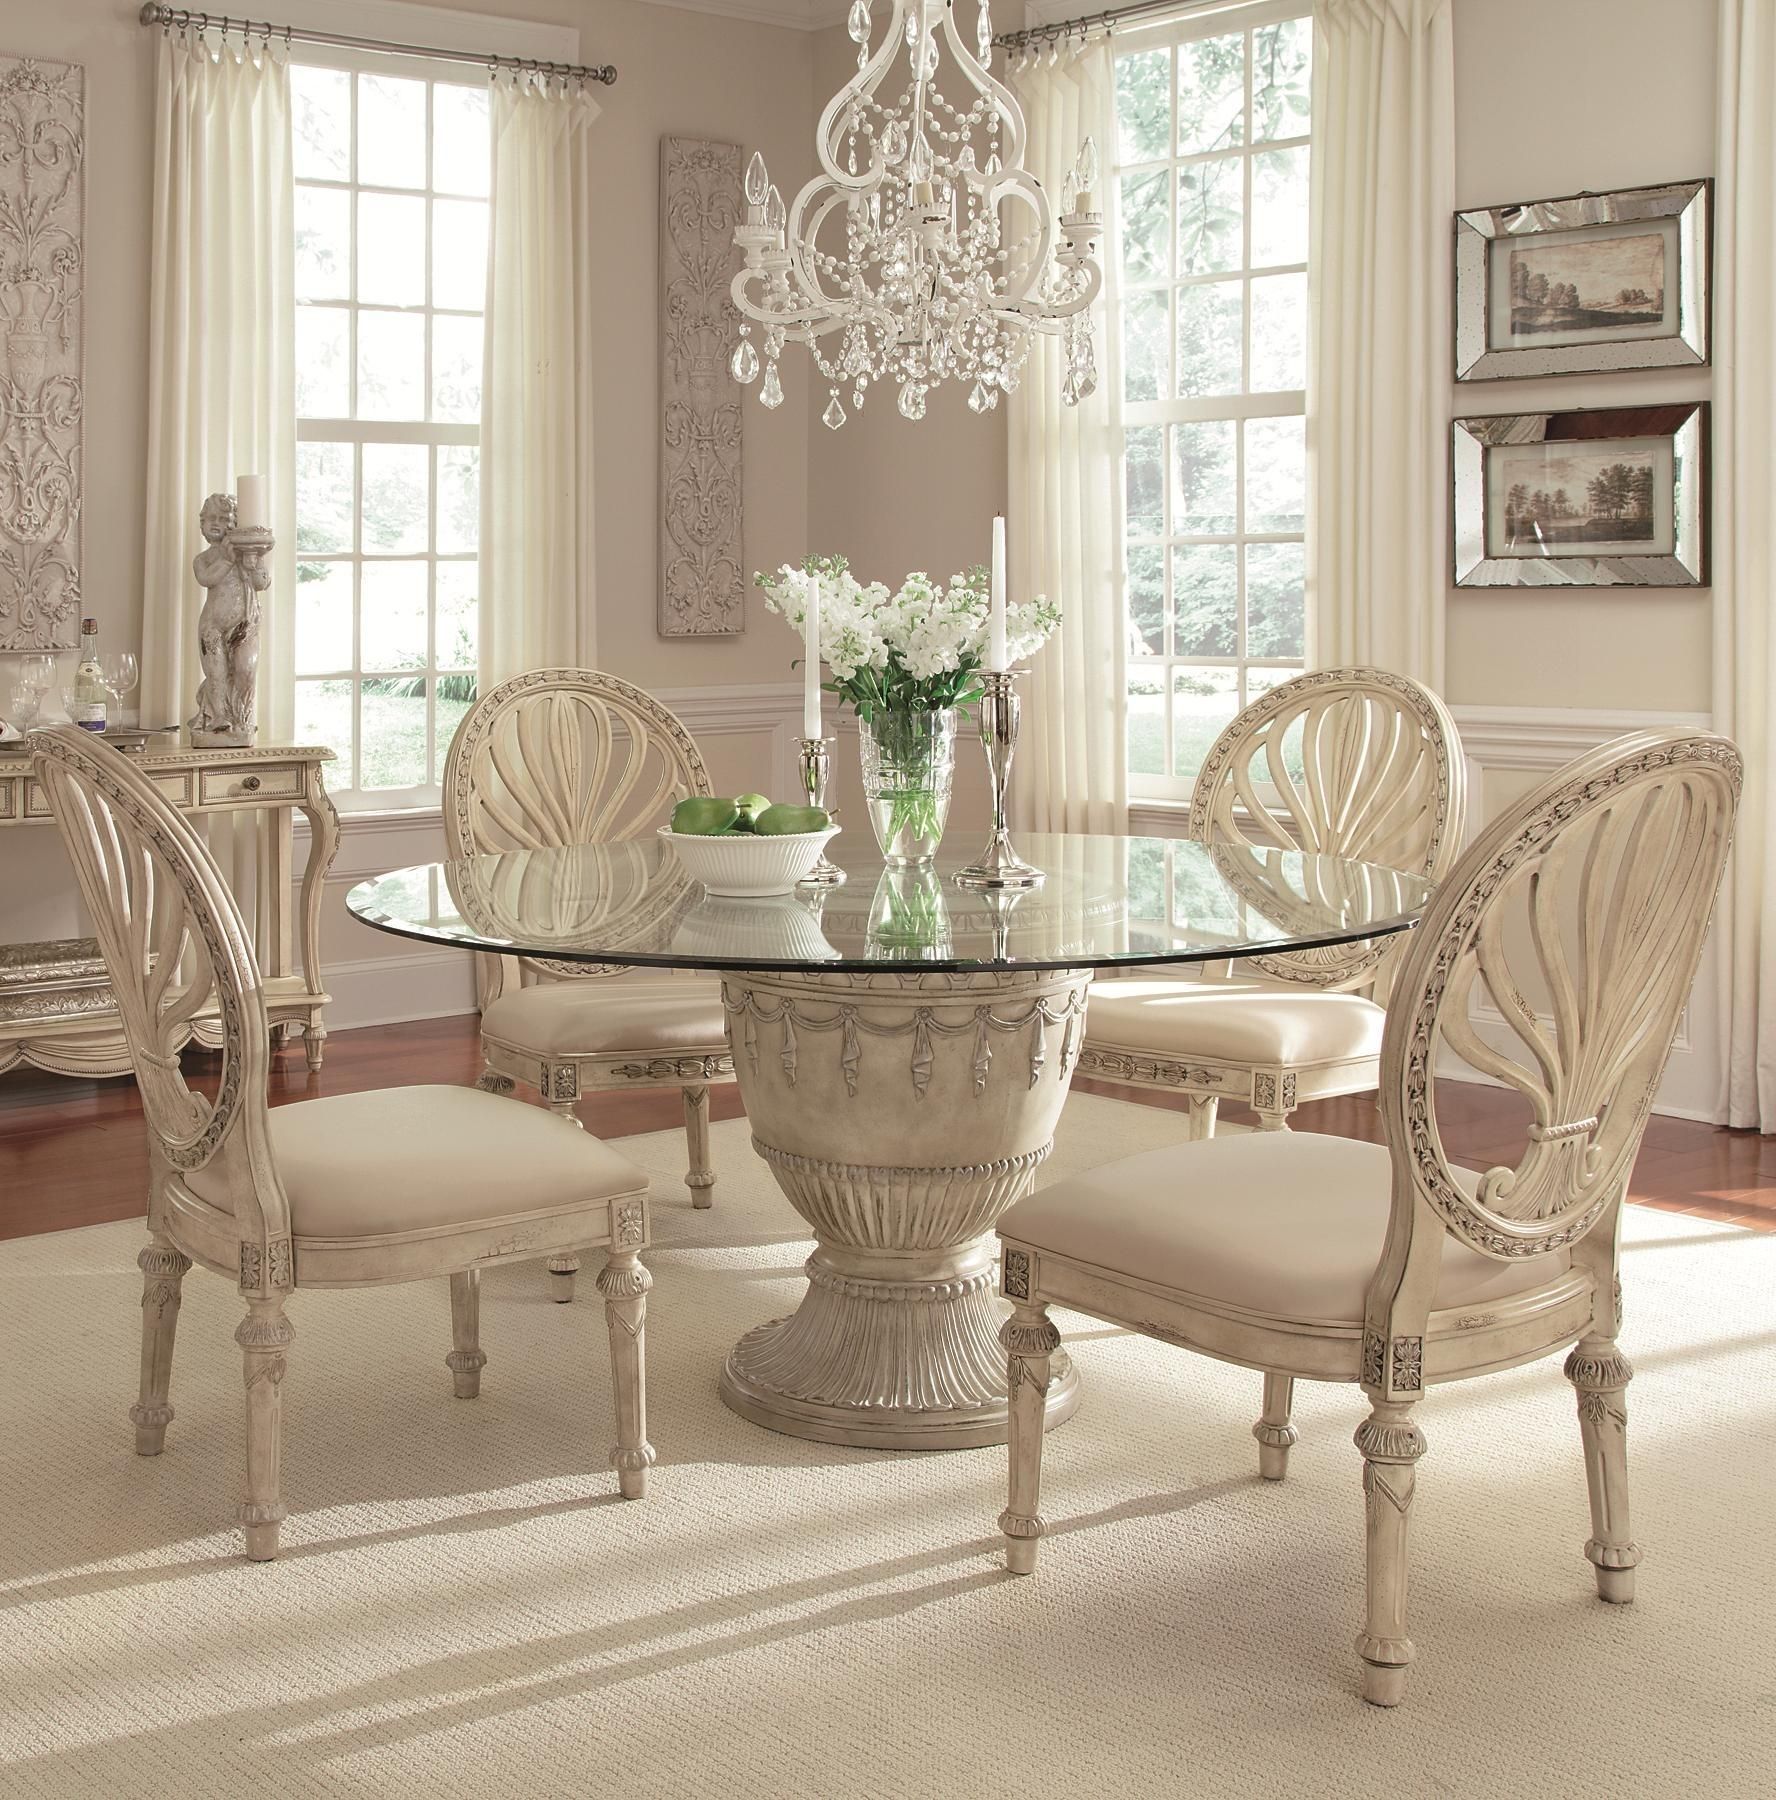 Empire Ii 5 Piece Round Table Dining Setschnadig | Dining Room In Latest Candice Ii 5 Piece Round Dining Sets (View 13 of 20)